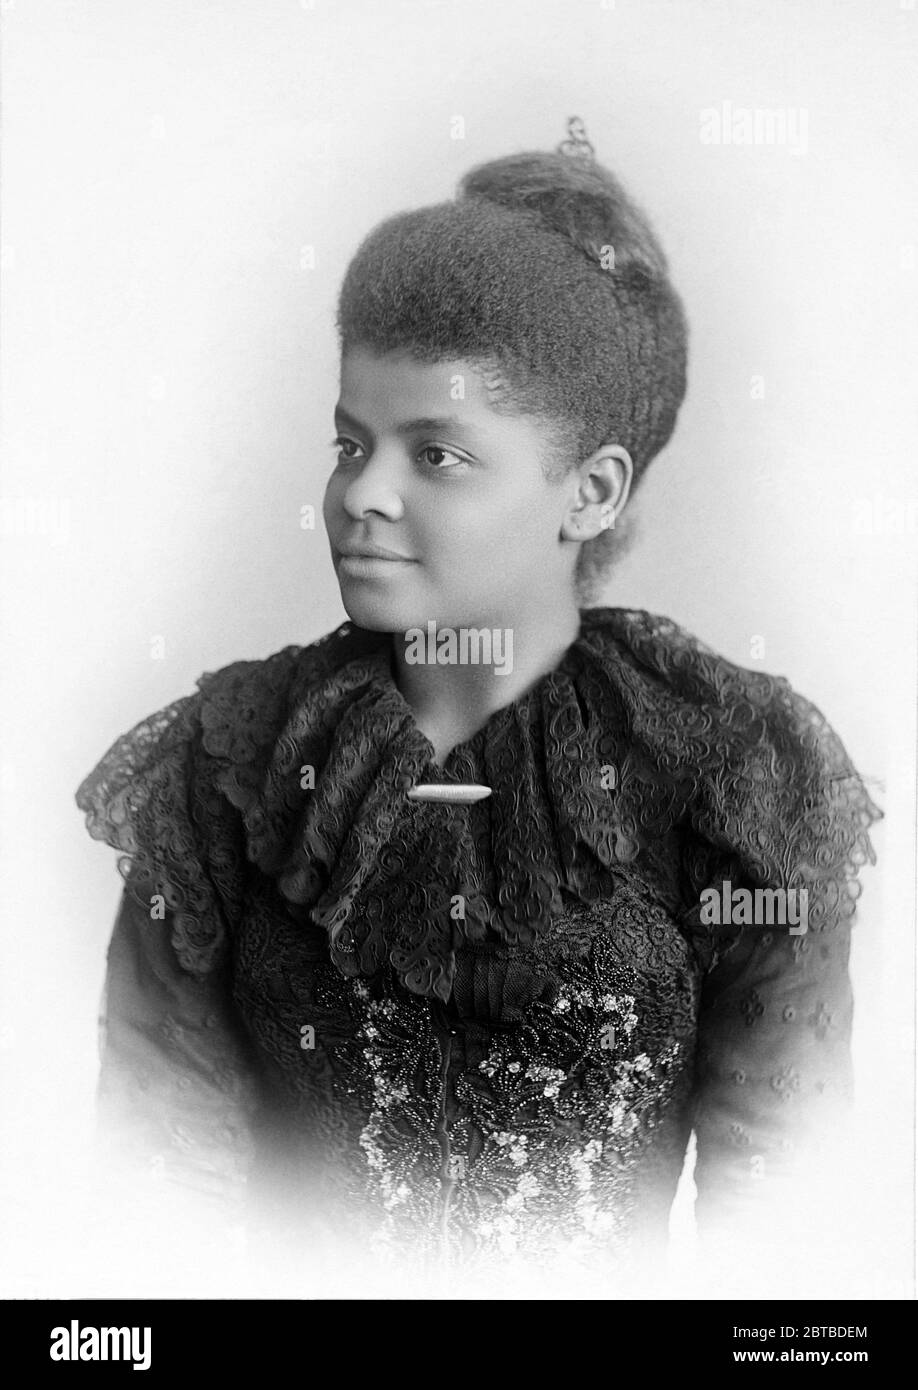 1893 , Chicago, USA : The  IDA B. WELLS ( Bell Wells-Barnett  , 1861 - 1931 ), photo by Miss Garrity , Chicago. American investigative journalist , educator and early leader in the civil rights movement . She was one of the founders of the National Association for the Advancement of Colored People ( NAACP ).Wells arguably became the most famous black woman in America, during a life that was centered on combating prejudice and violence, who fought for equality for African Americans , especially women .- Wells Barnett - Movimento diritti civili - Gente di Colore - AFRO-AMERICANI - Afro Americani Stock Photo